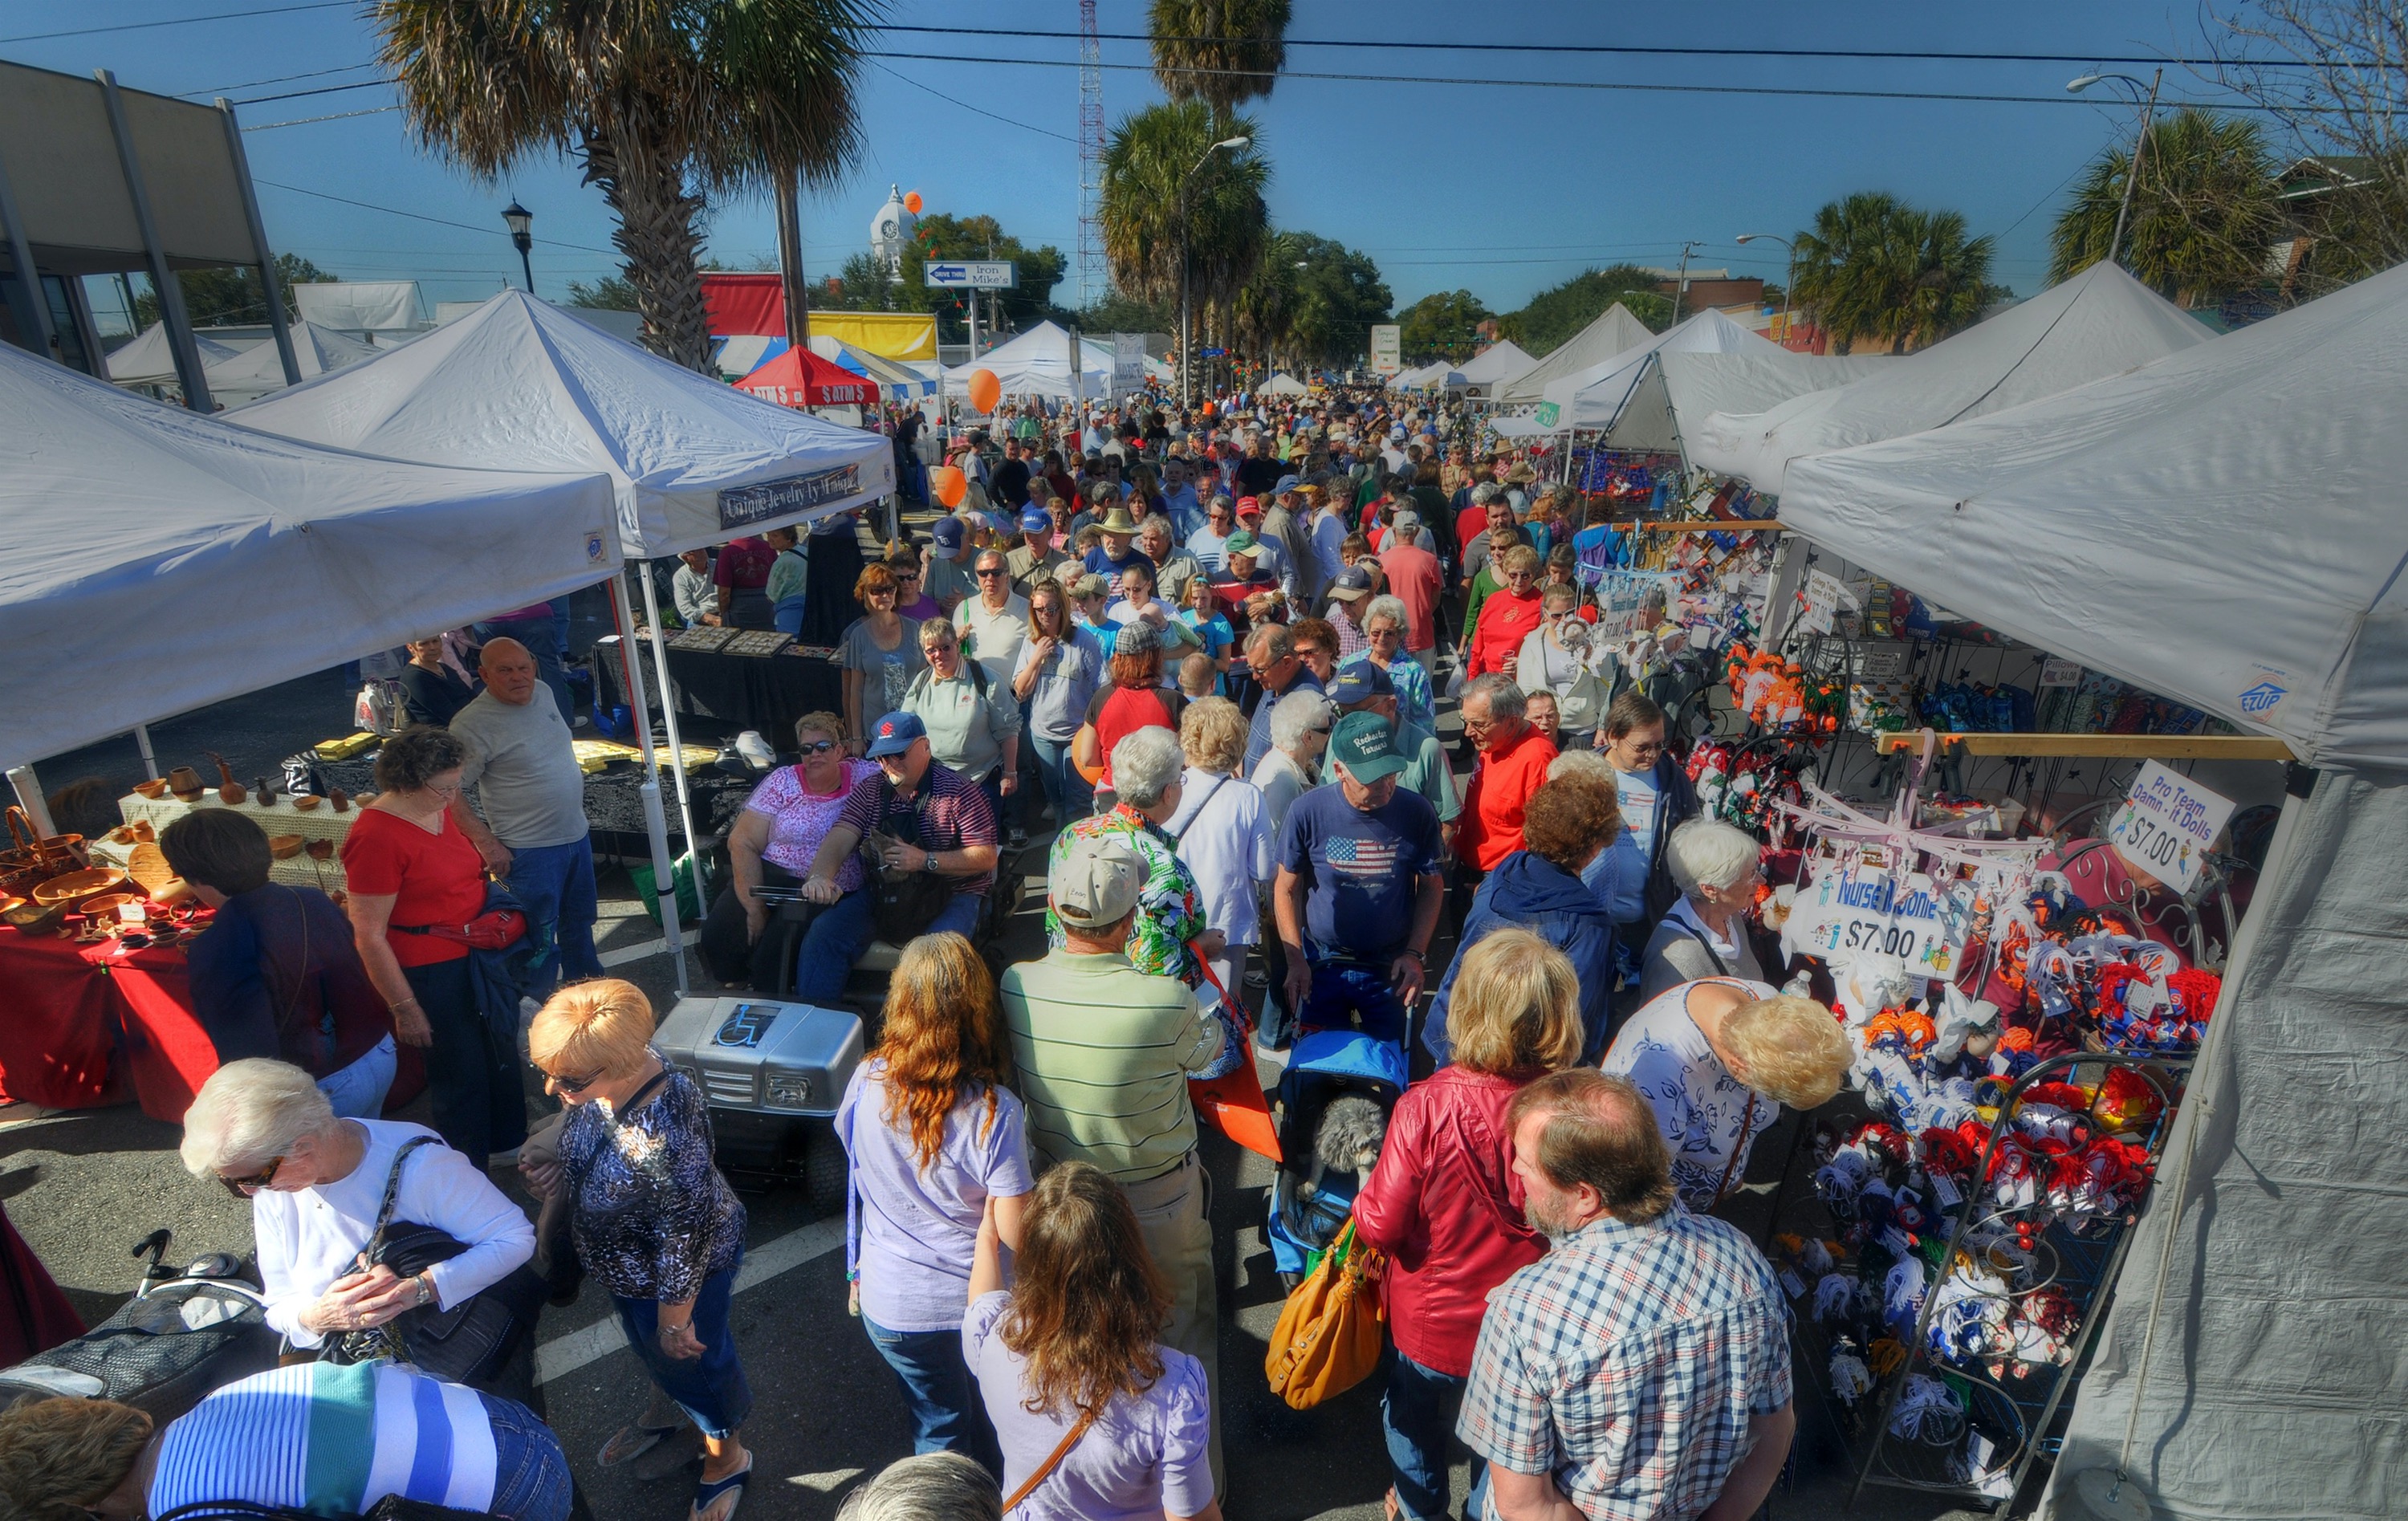 Festival goers attend the annual Kumquat Festival in Dade City, Florida.